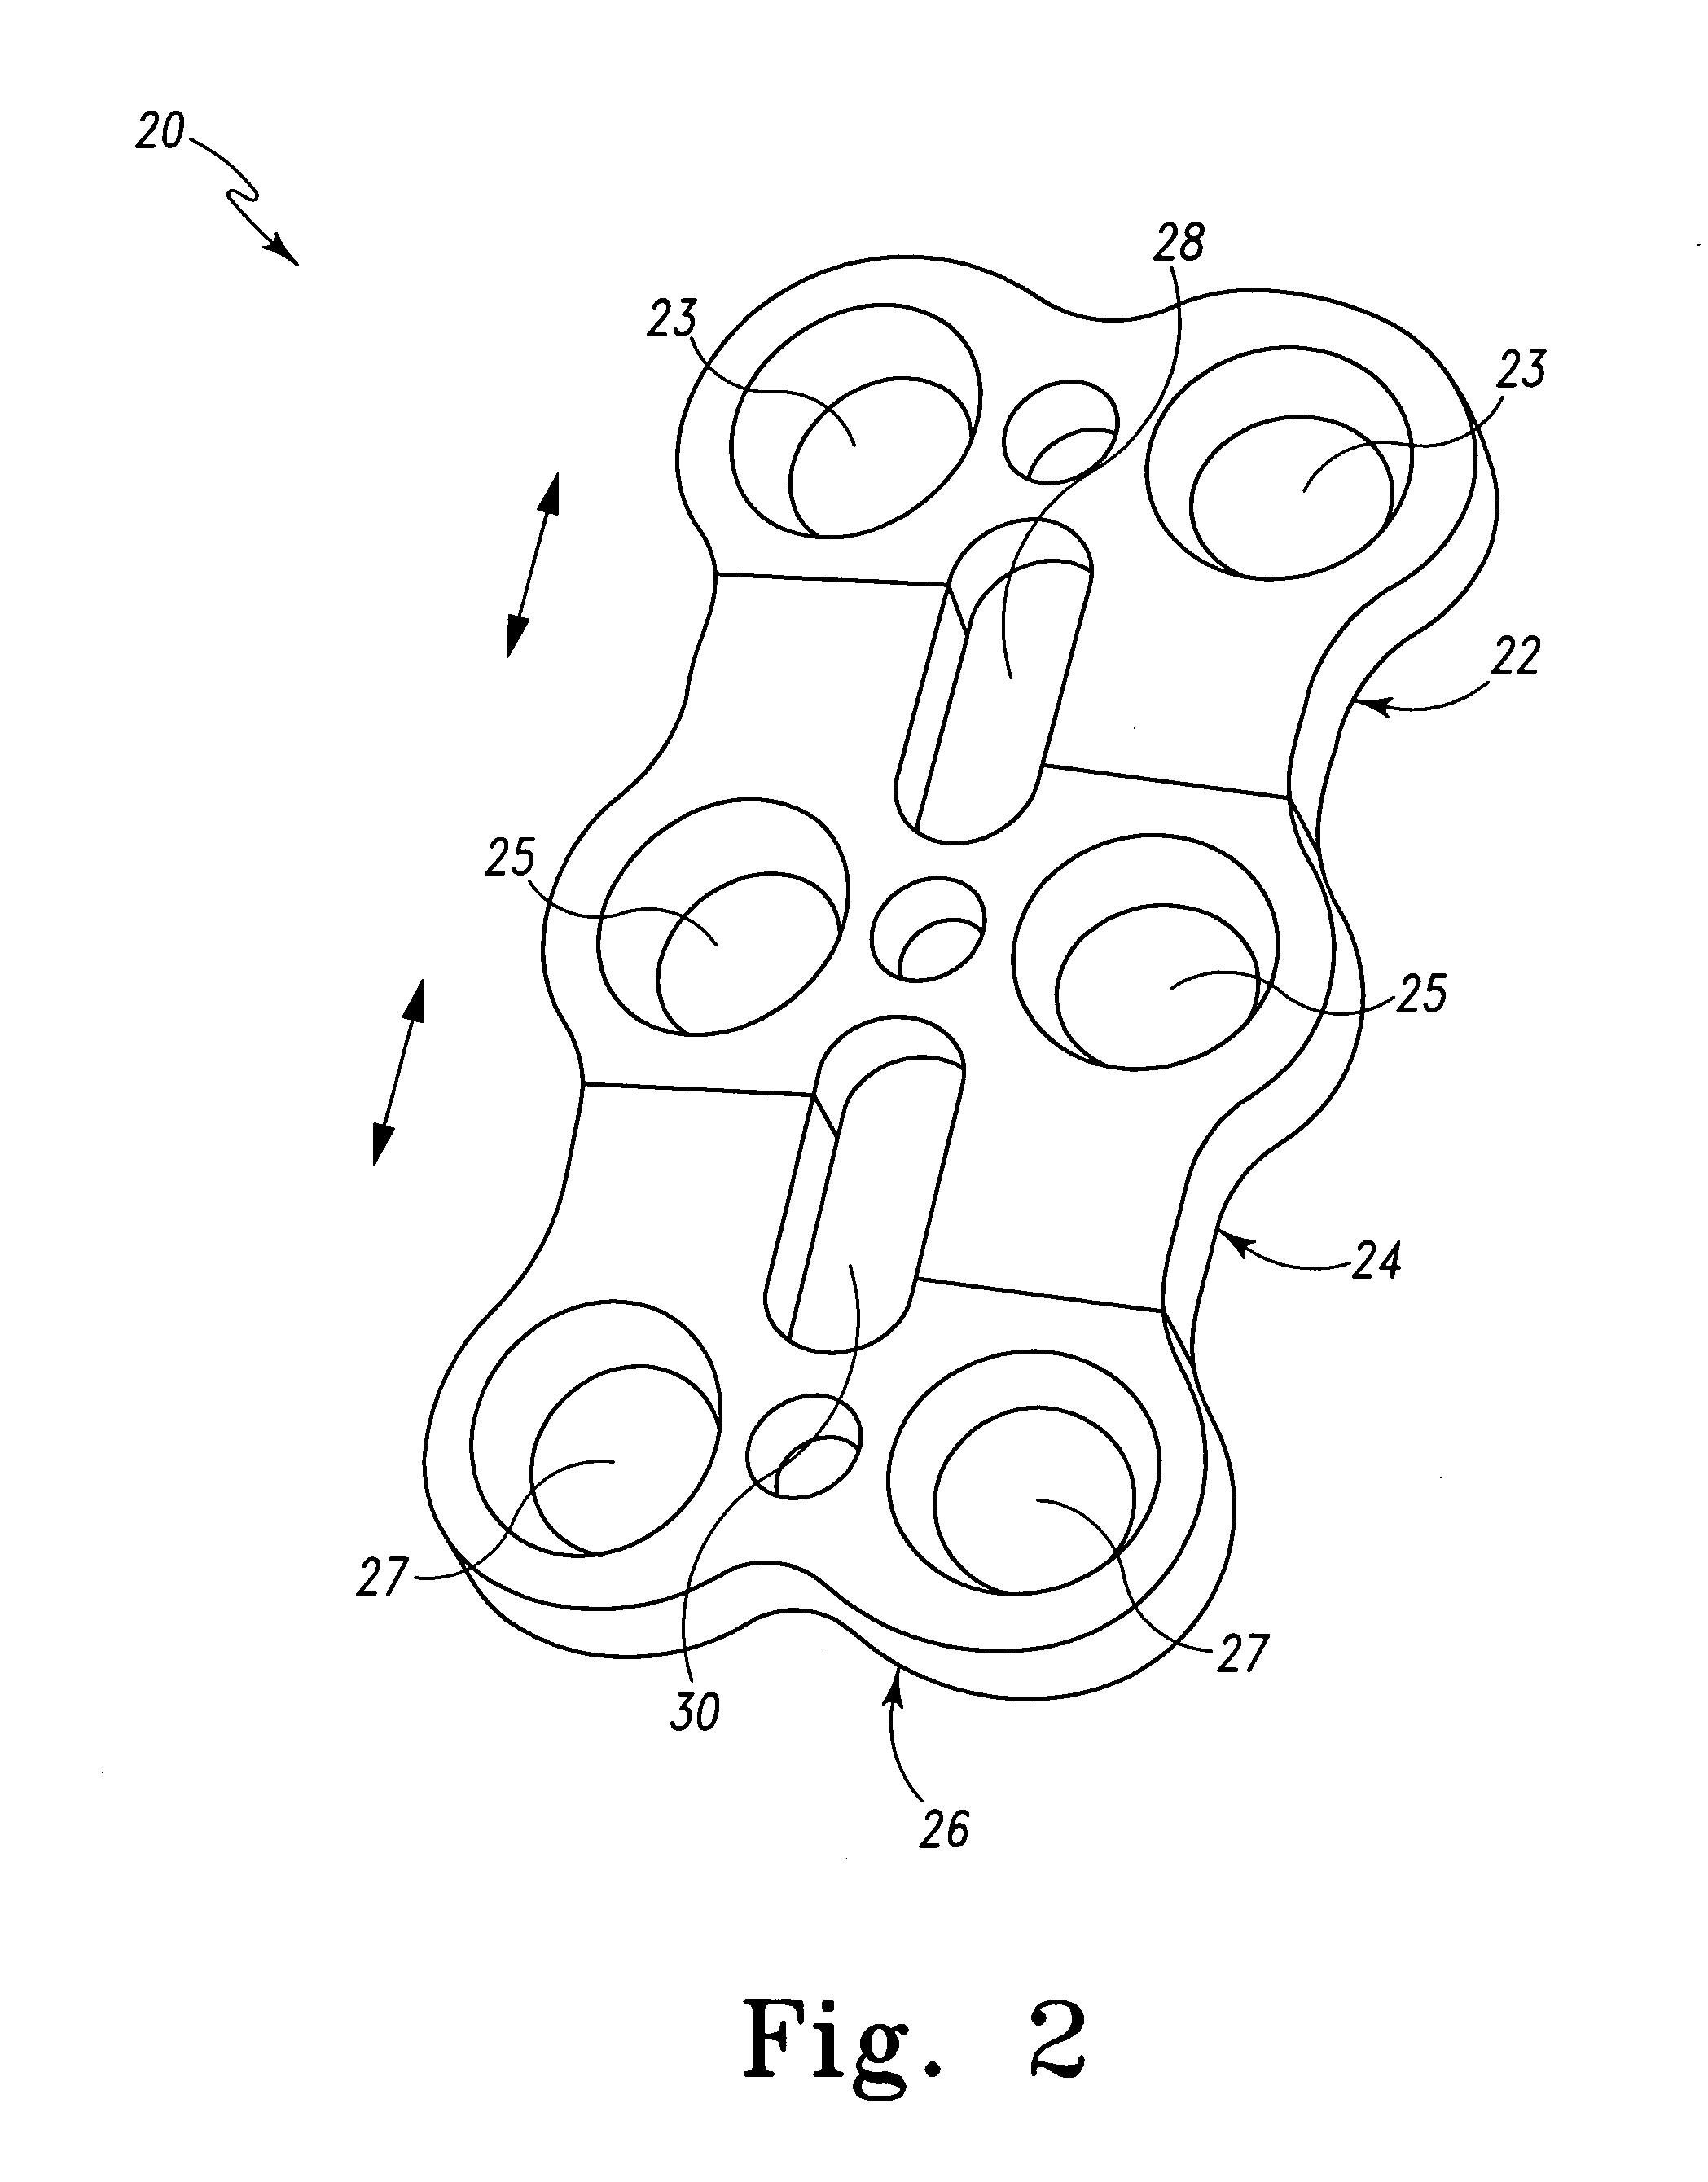 Method of fabricating medical devices and medical devices made thereby